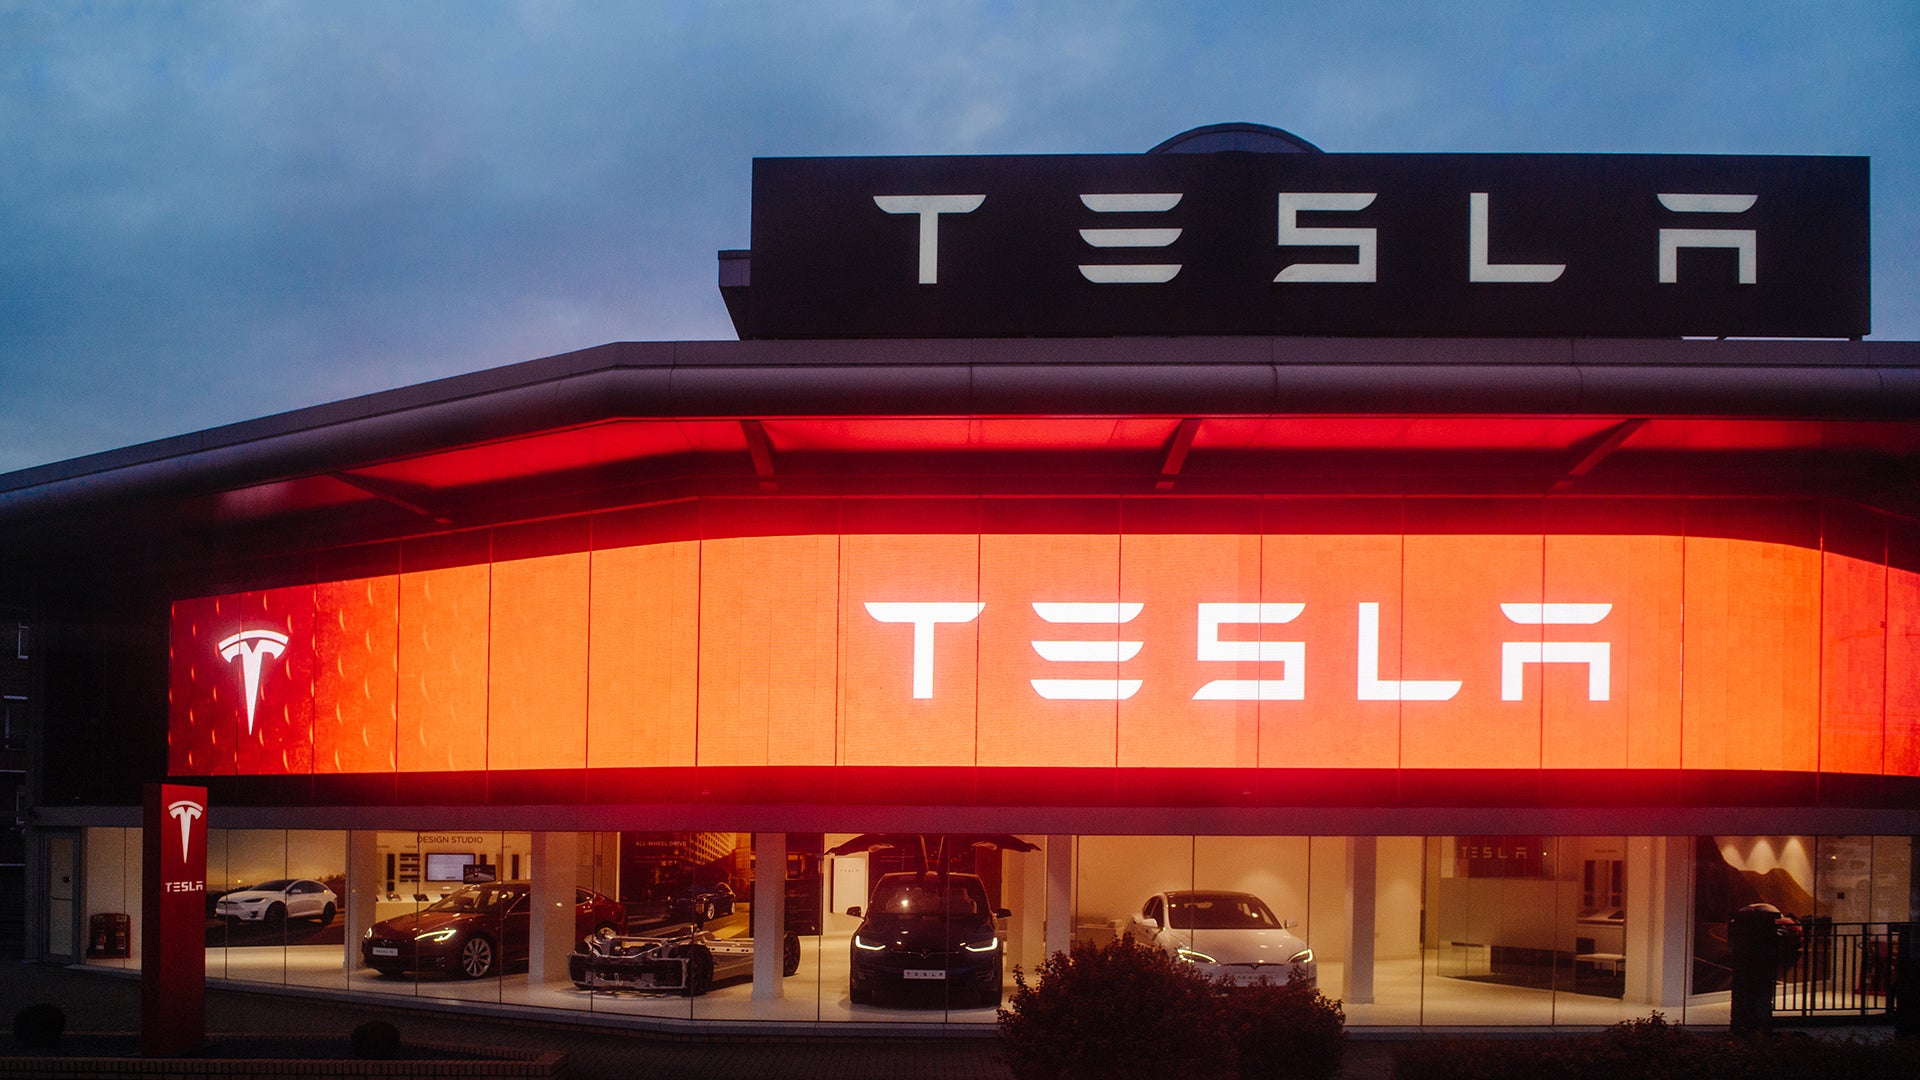 Nearly $190M of Tesla’s Q3 Profit Was Earned by Selling Regulatory Credits, Not Sales Revenue